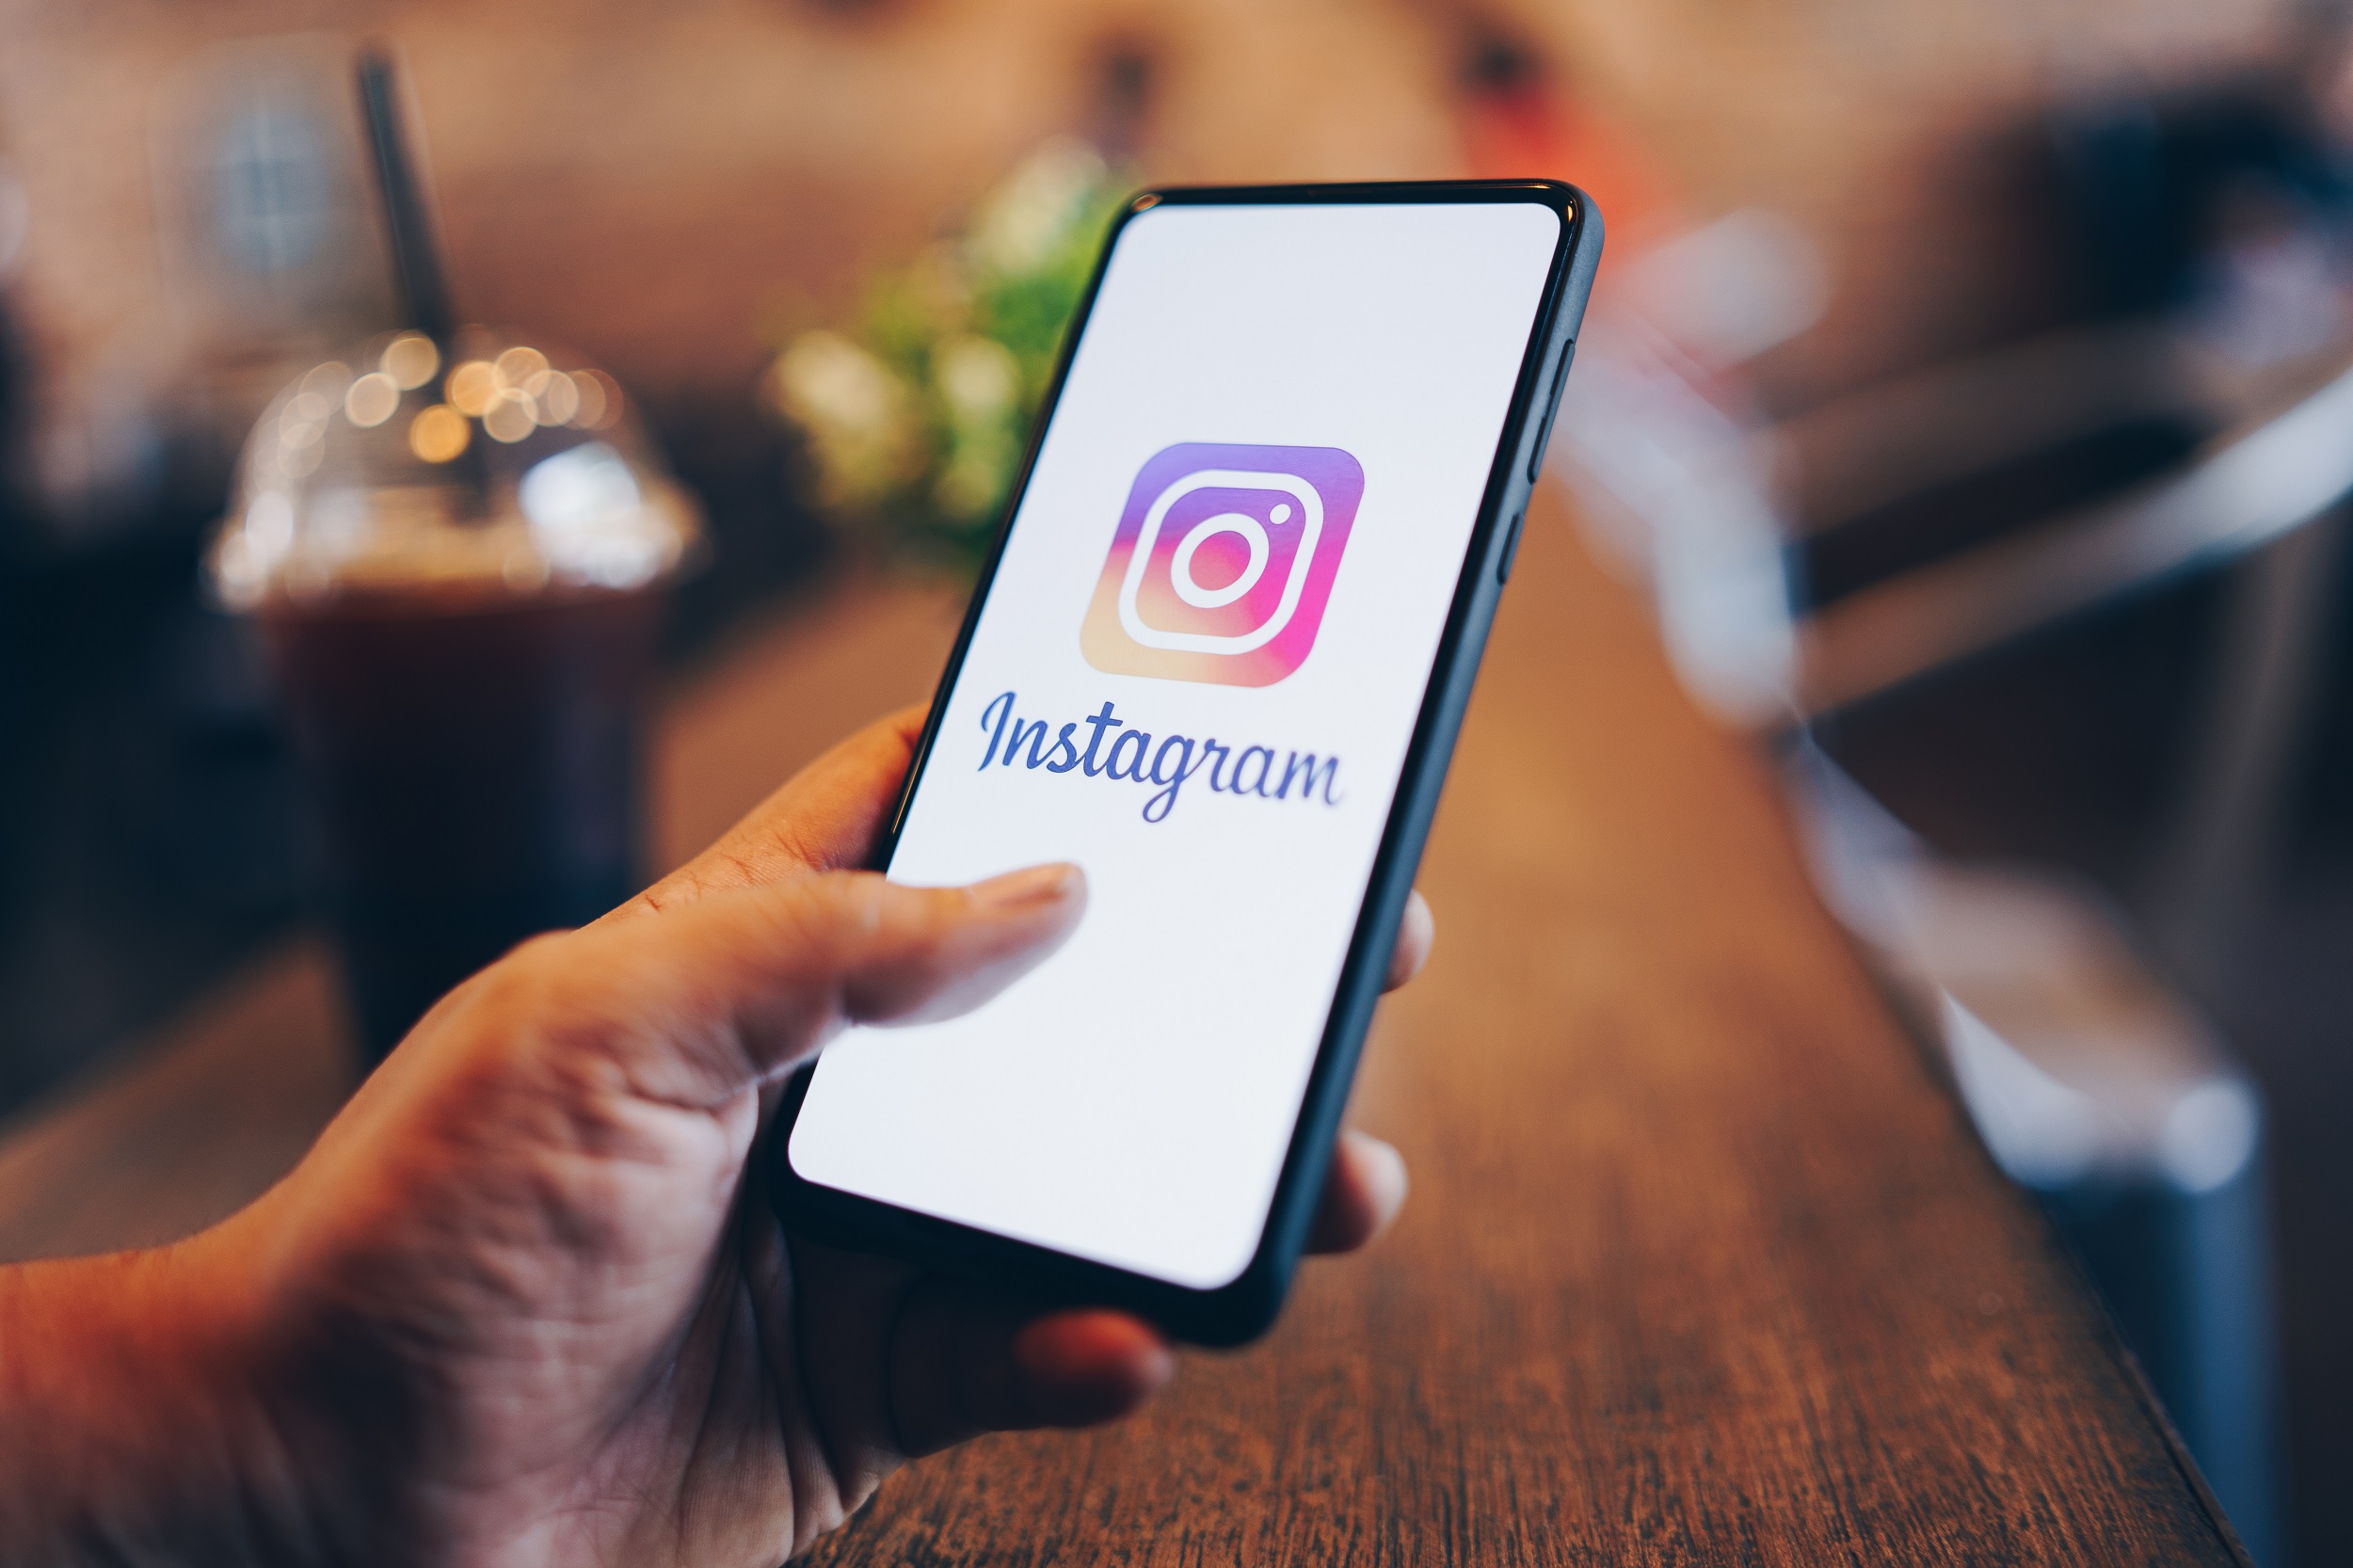 how to view a private instagram account